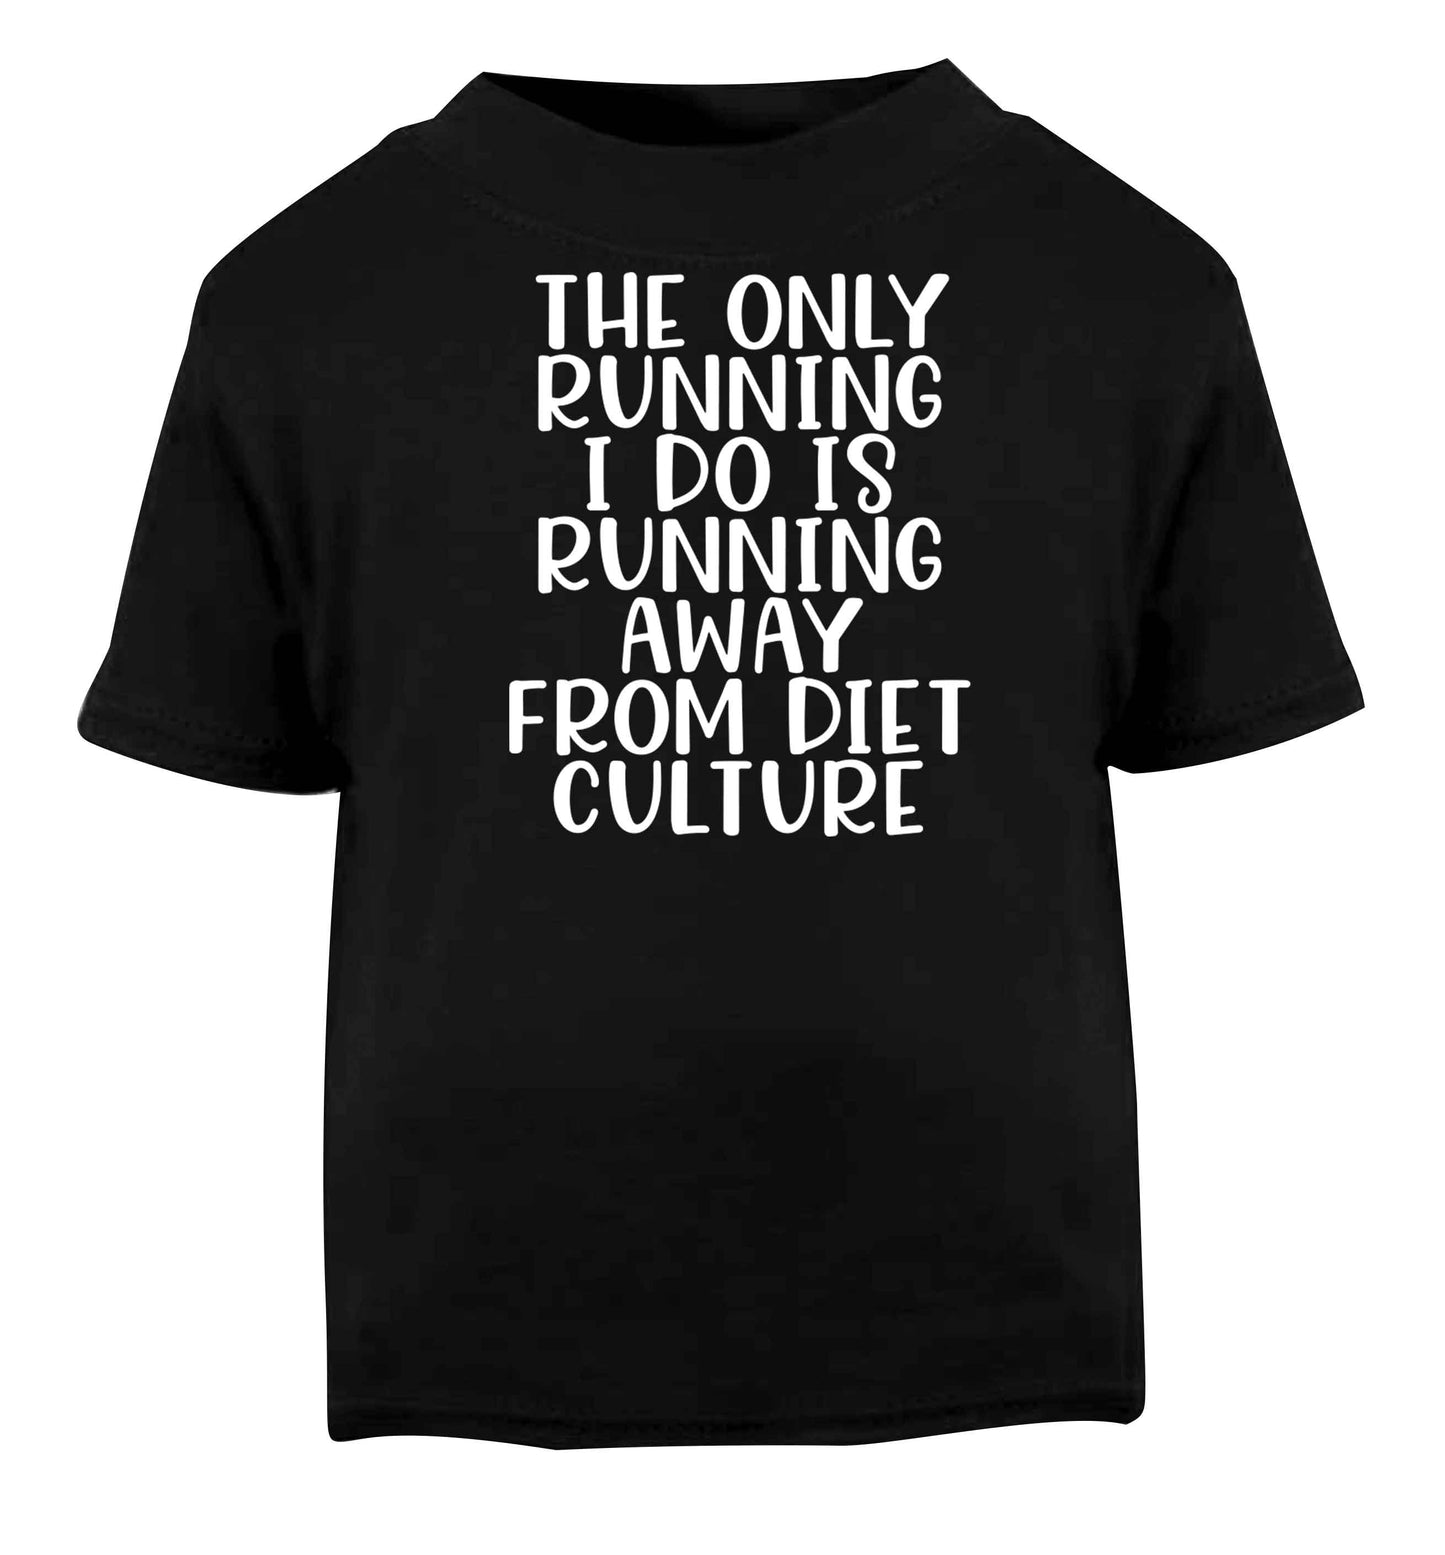 The only running I do is running away from diet culture Black baby toddler Tshirt 2 years